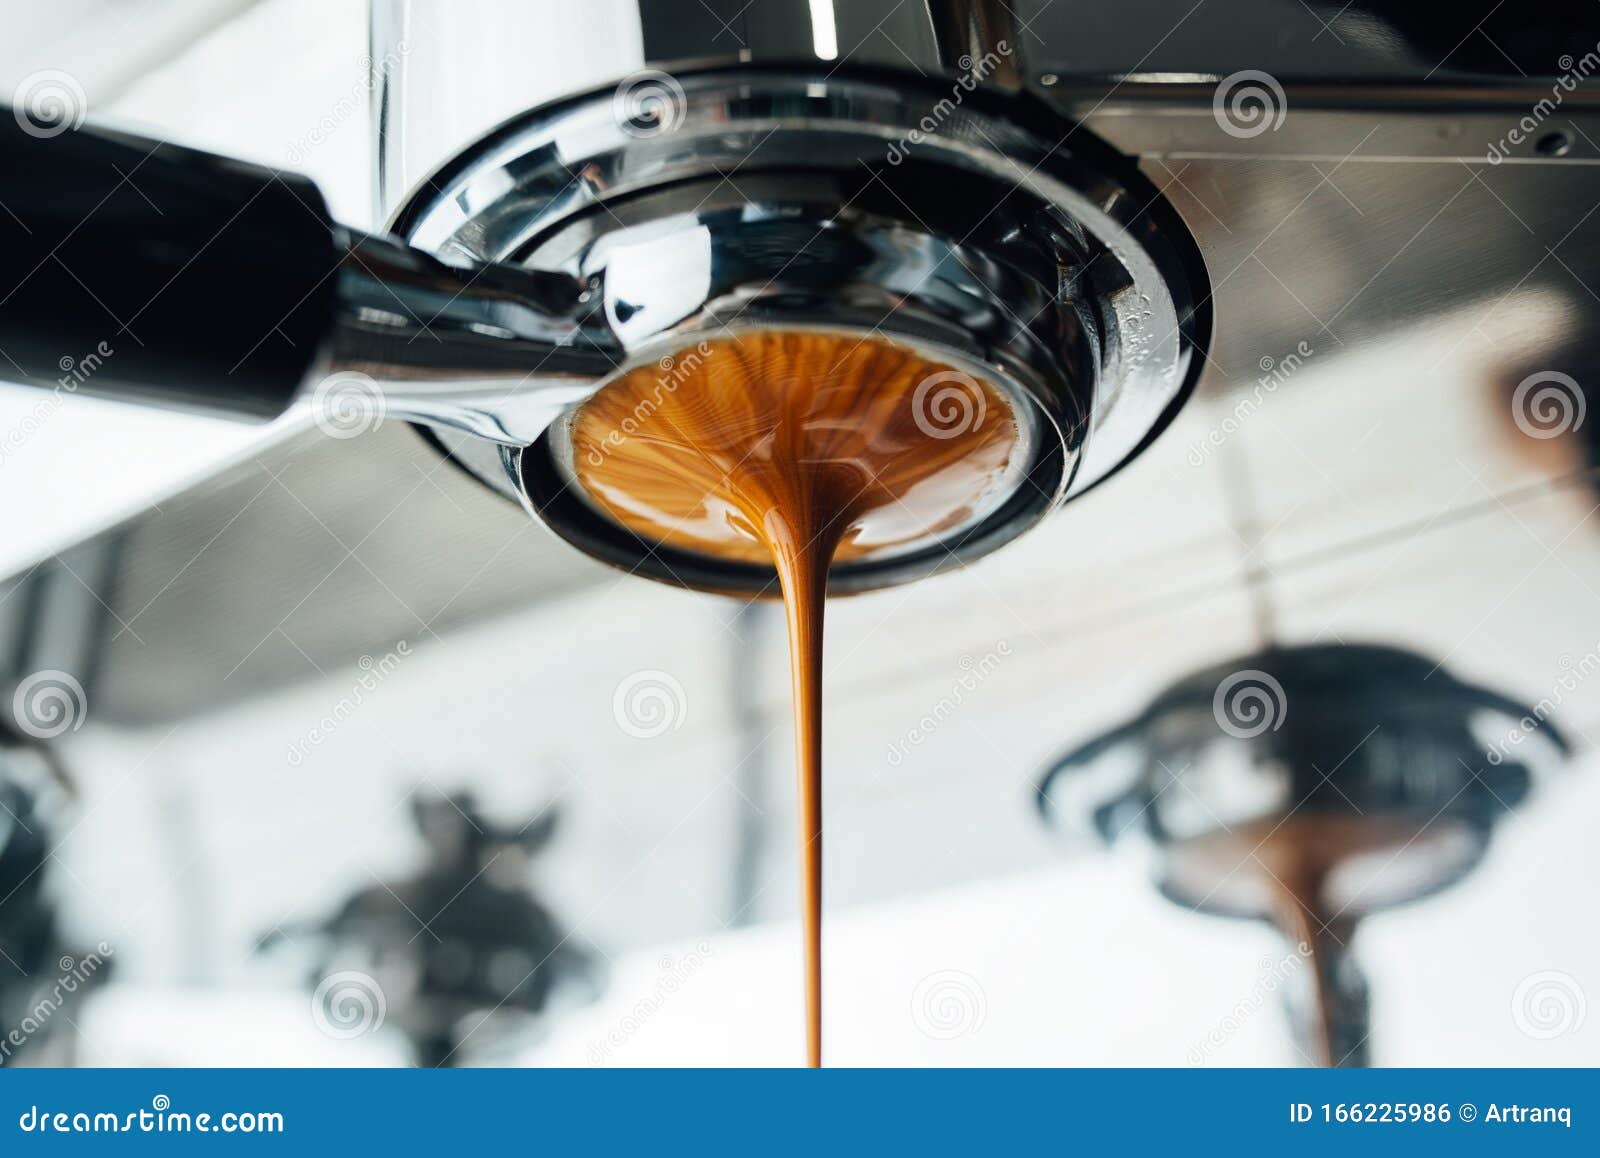 final stage of the espresso extraction process from bottomless portafilter